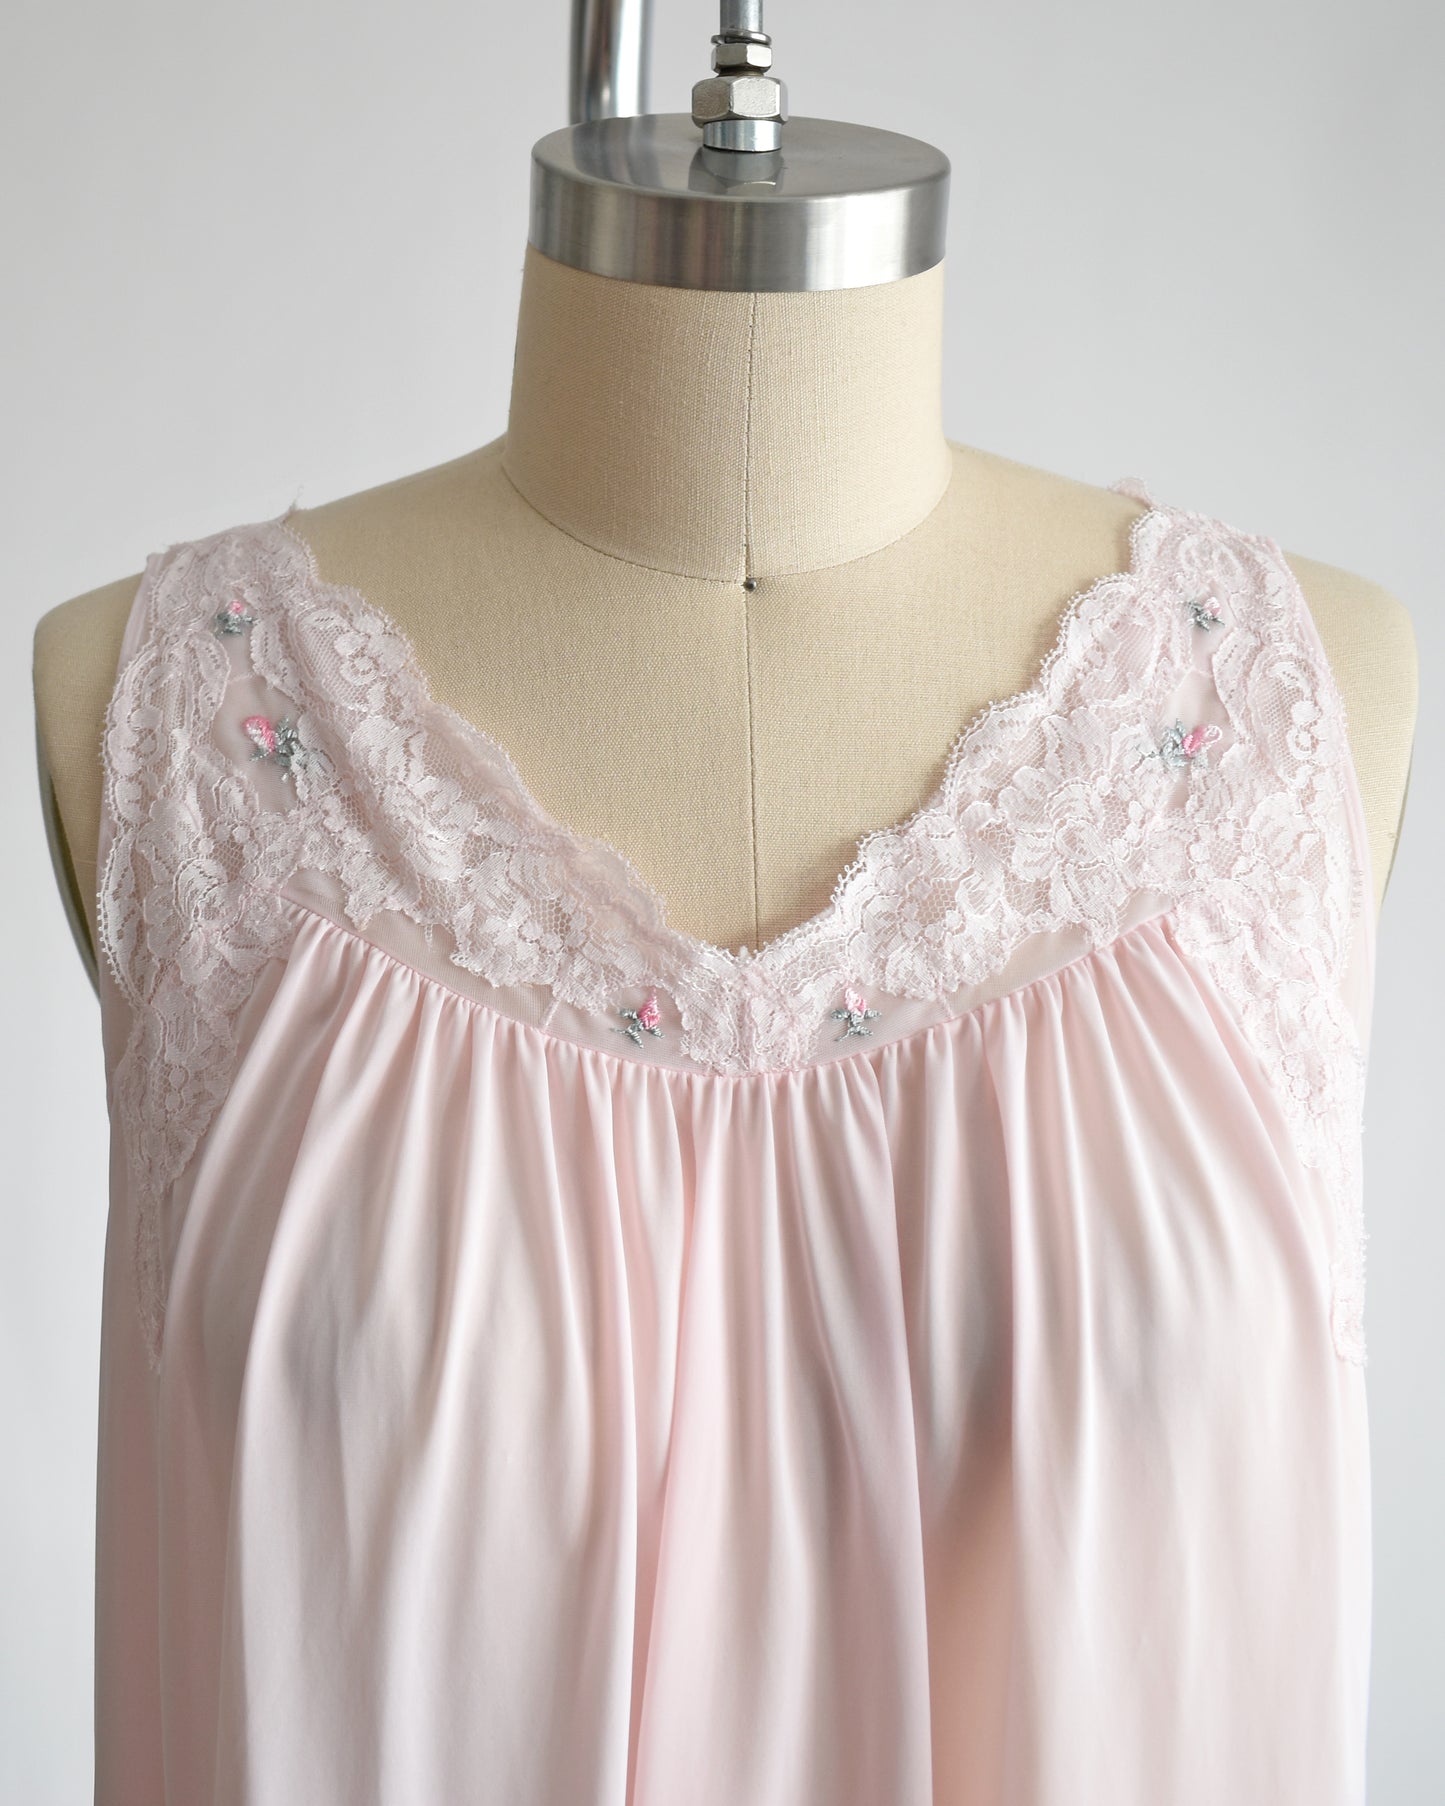 Close up of the front of the neckline that features floral lace and small embroidered flowers